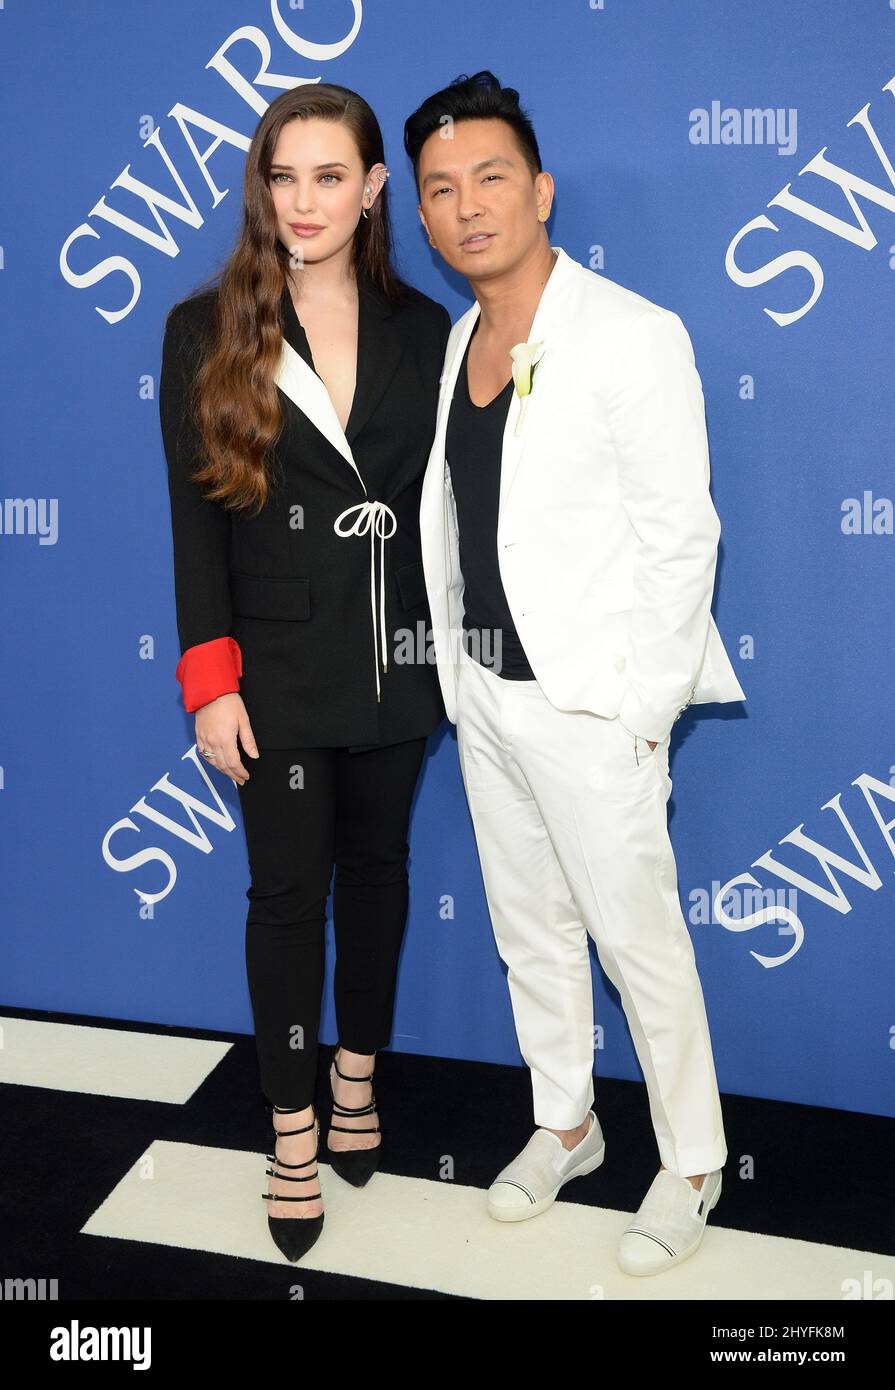 Katherine Langford and Prabal Gurung at the 2018 CFDA Fashion Awards held at the Brooklyn Museum on June 4, 2018 in Brooklyn, NY Stock Photo